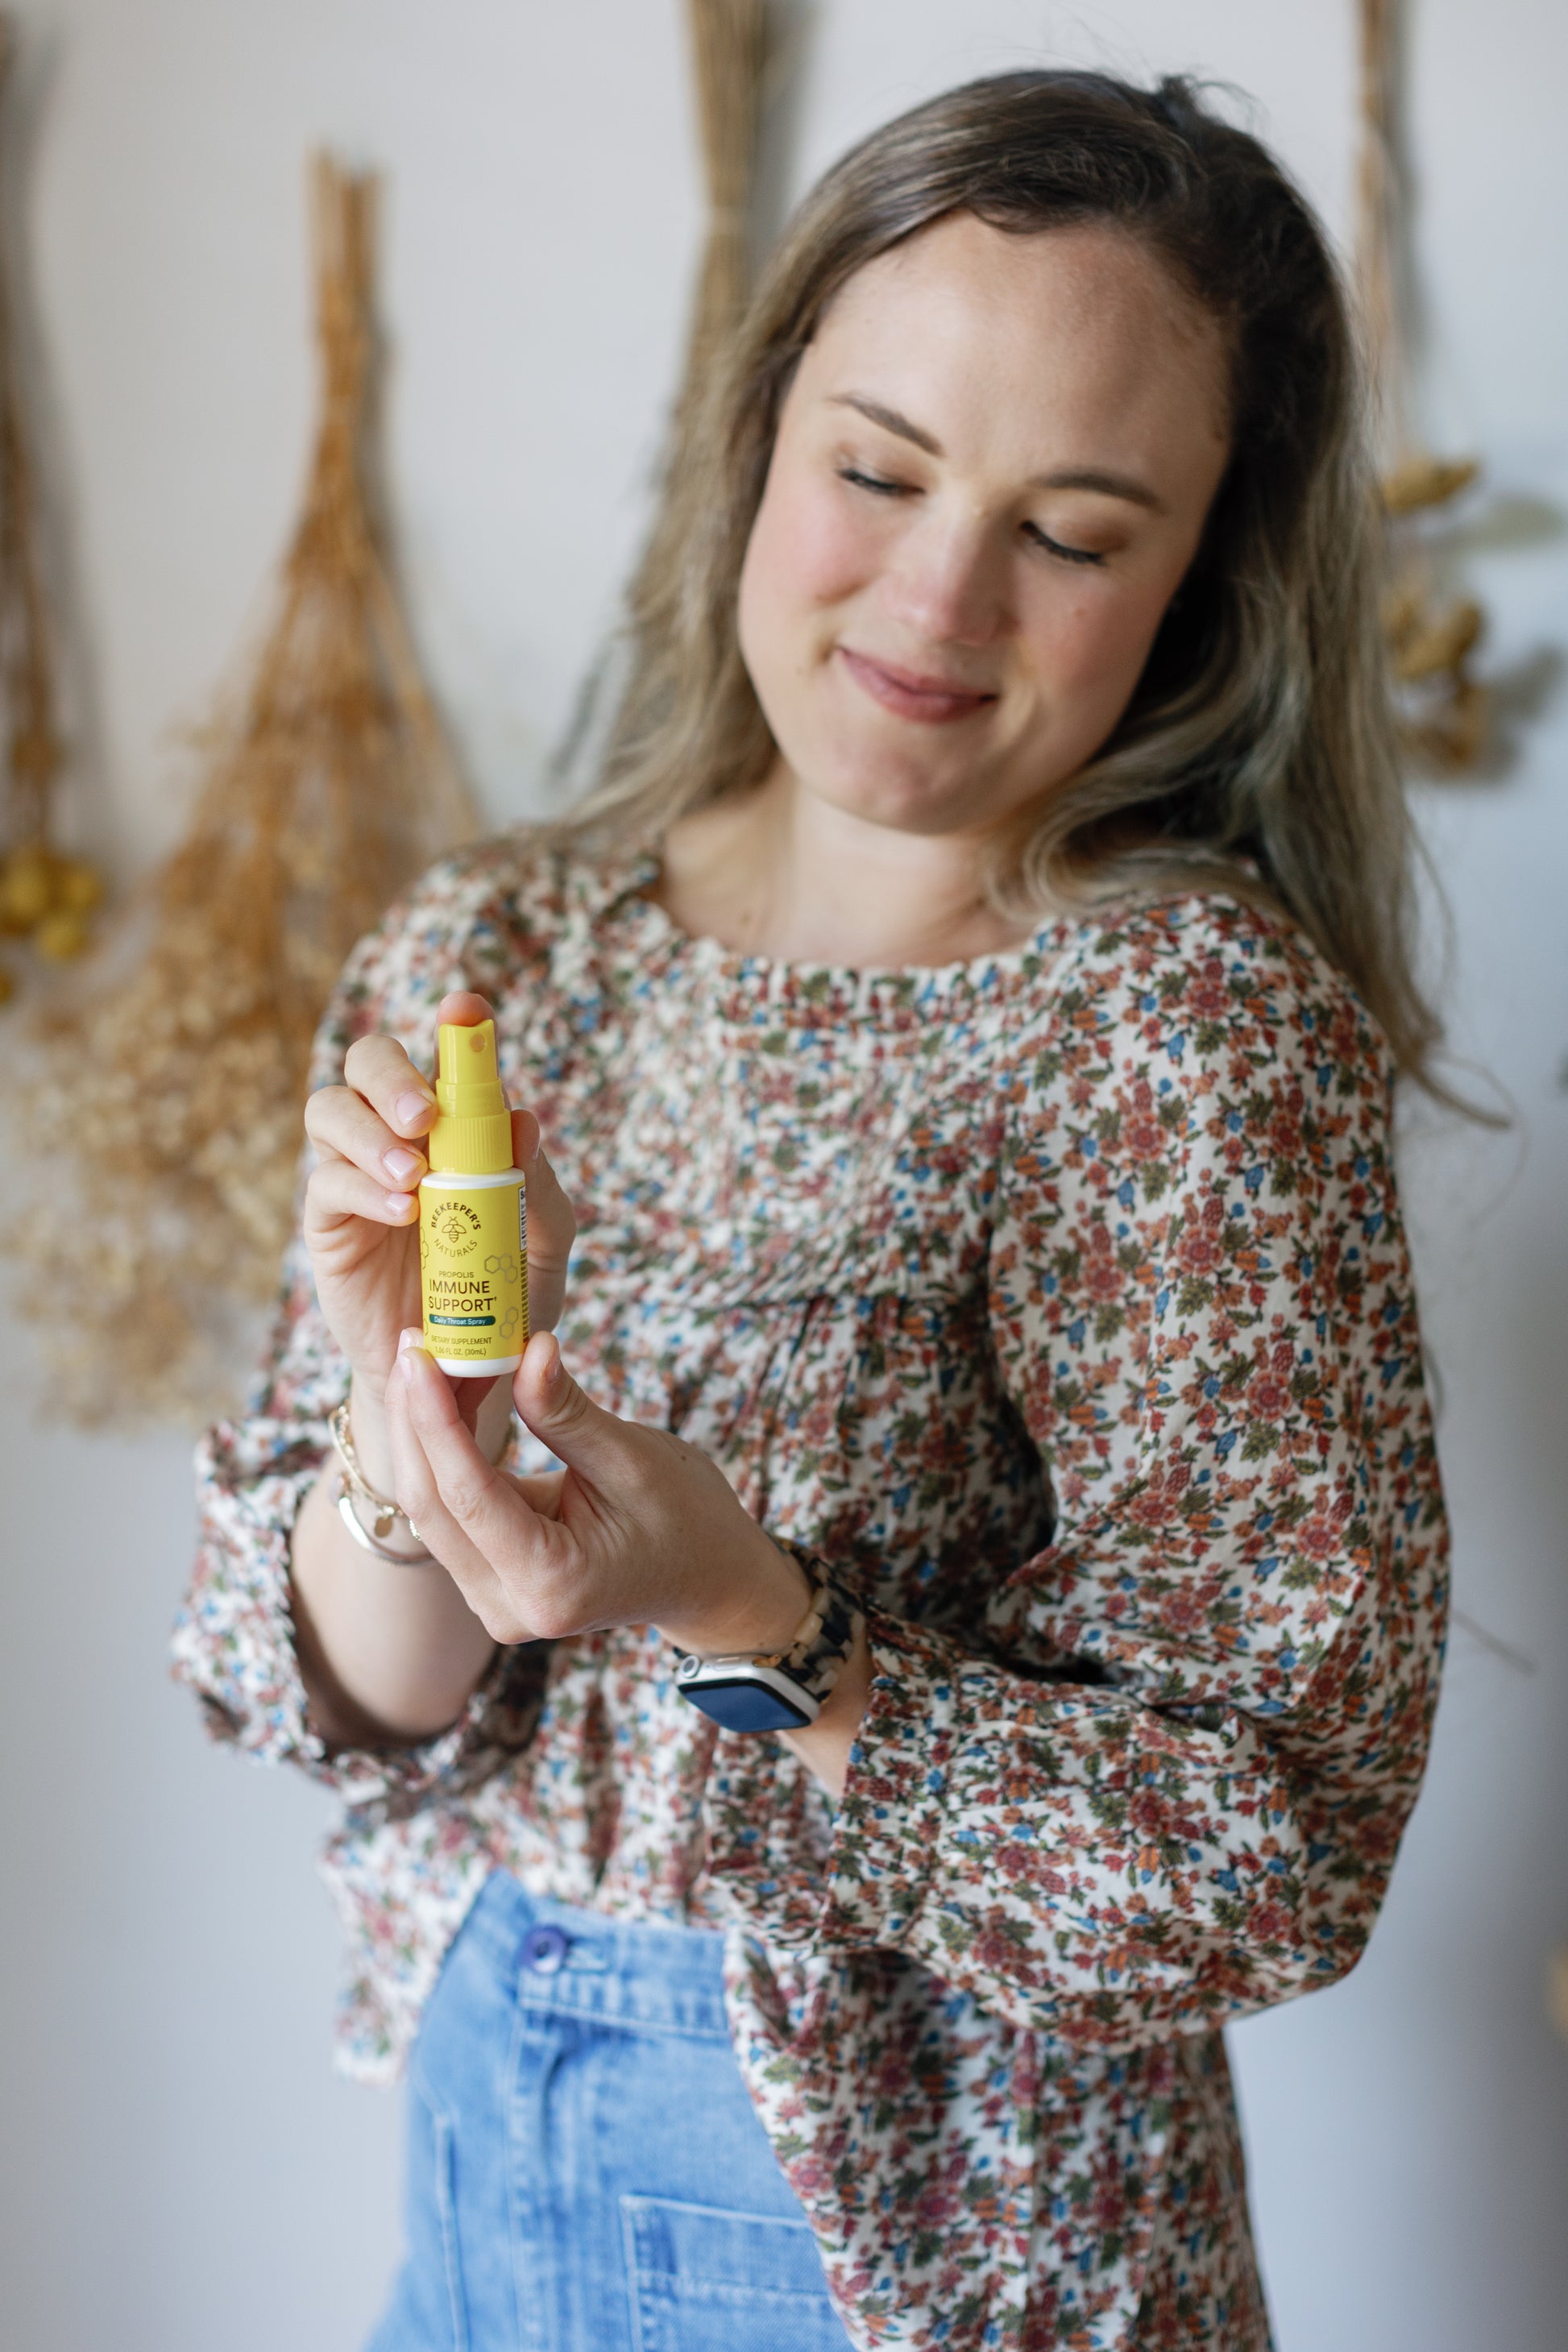 Image of Caroline smiling and showing the Propolis Throat Spray